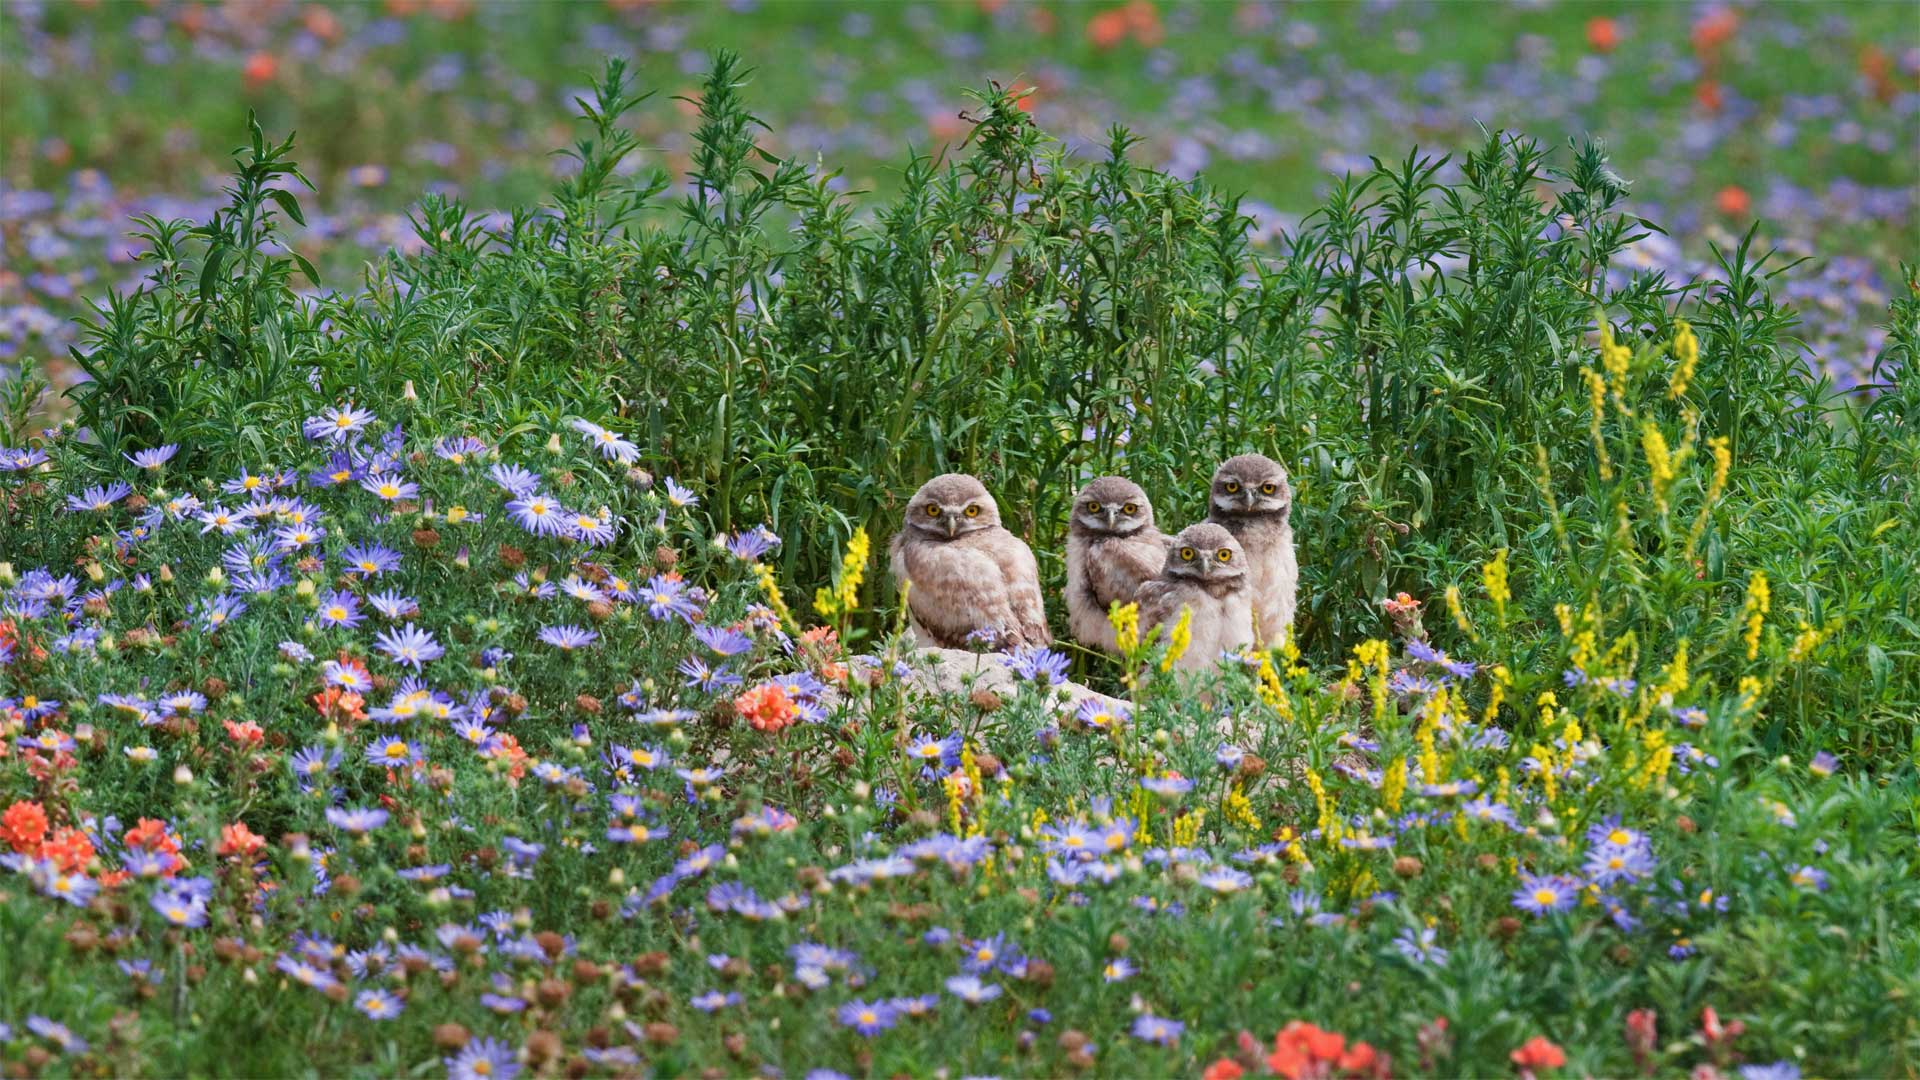 Burrowing owl chicks gaze out from among flowers near the Pawnee National Grassland in Colorado - Roberta Olenick/Alamy)